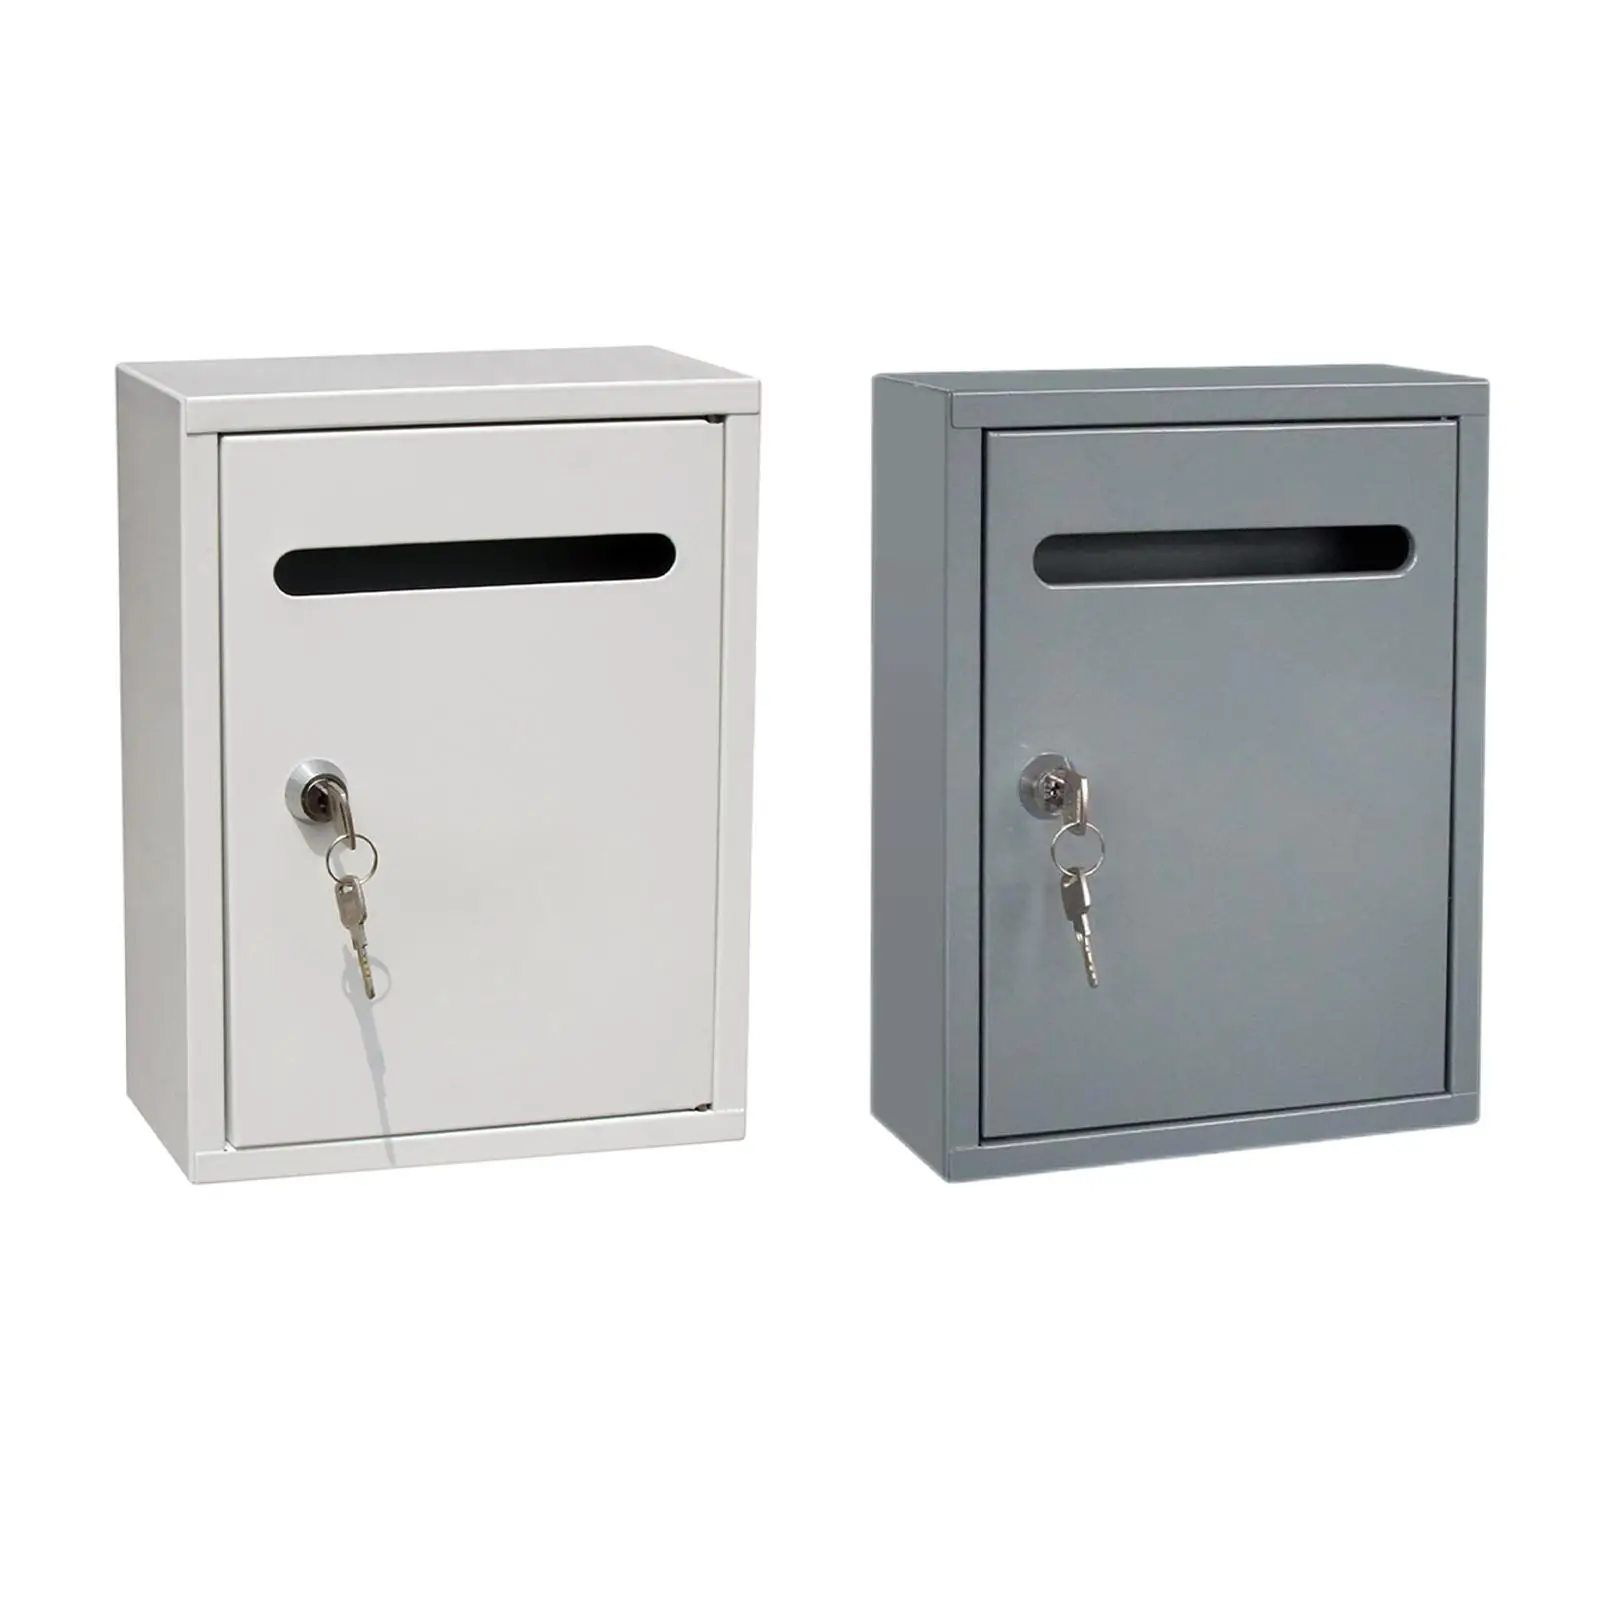 Mailbox Key Lock Wall Mounted Drop Box Heavy Duty Collection Boxes Letterbox